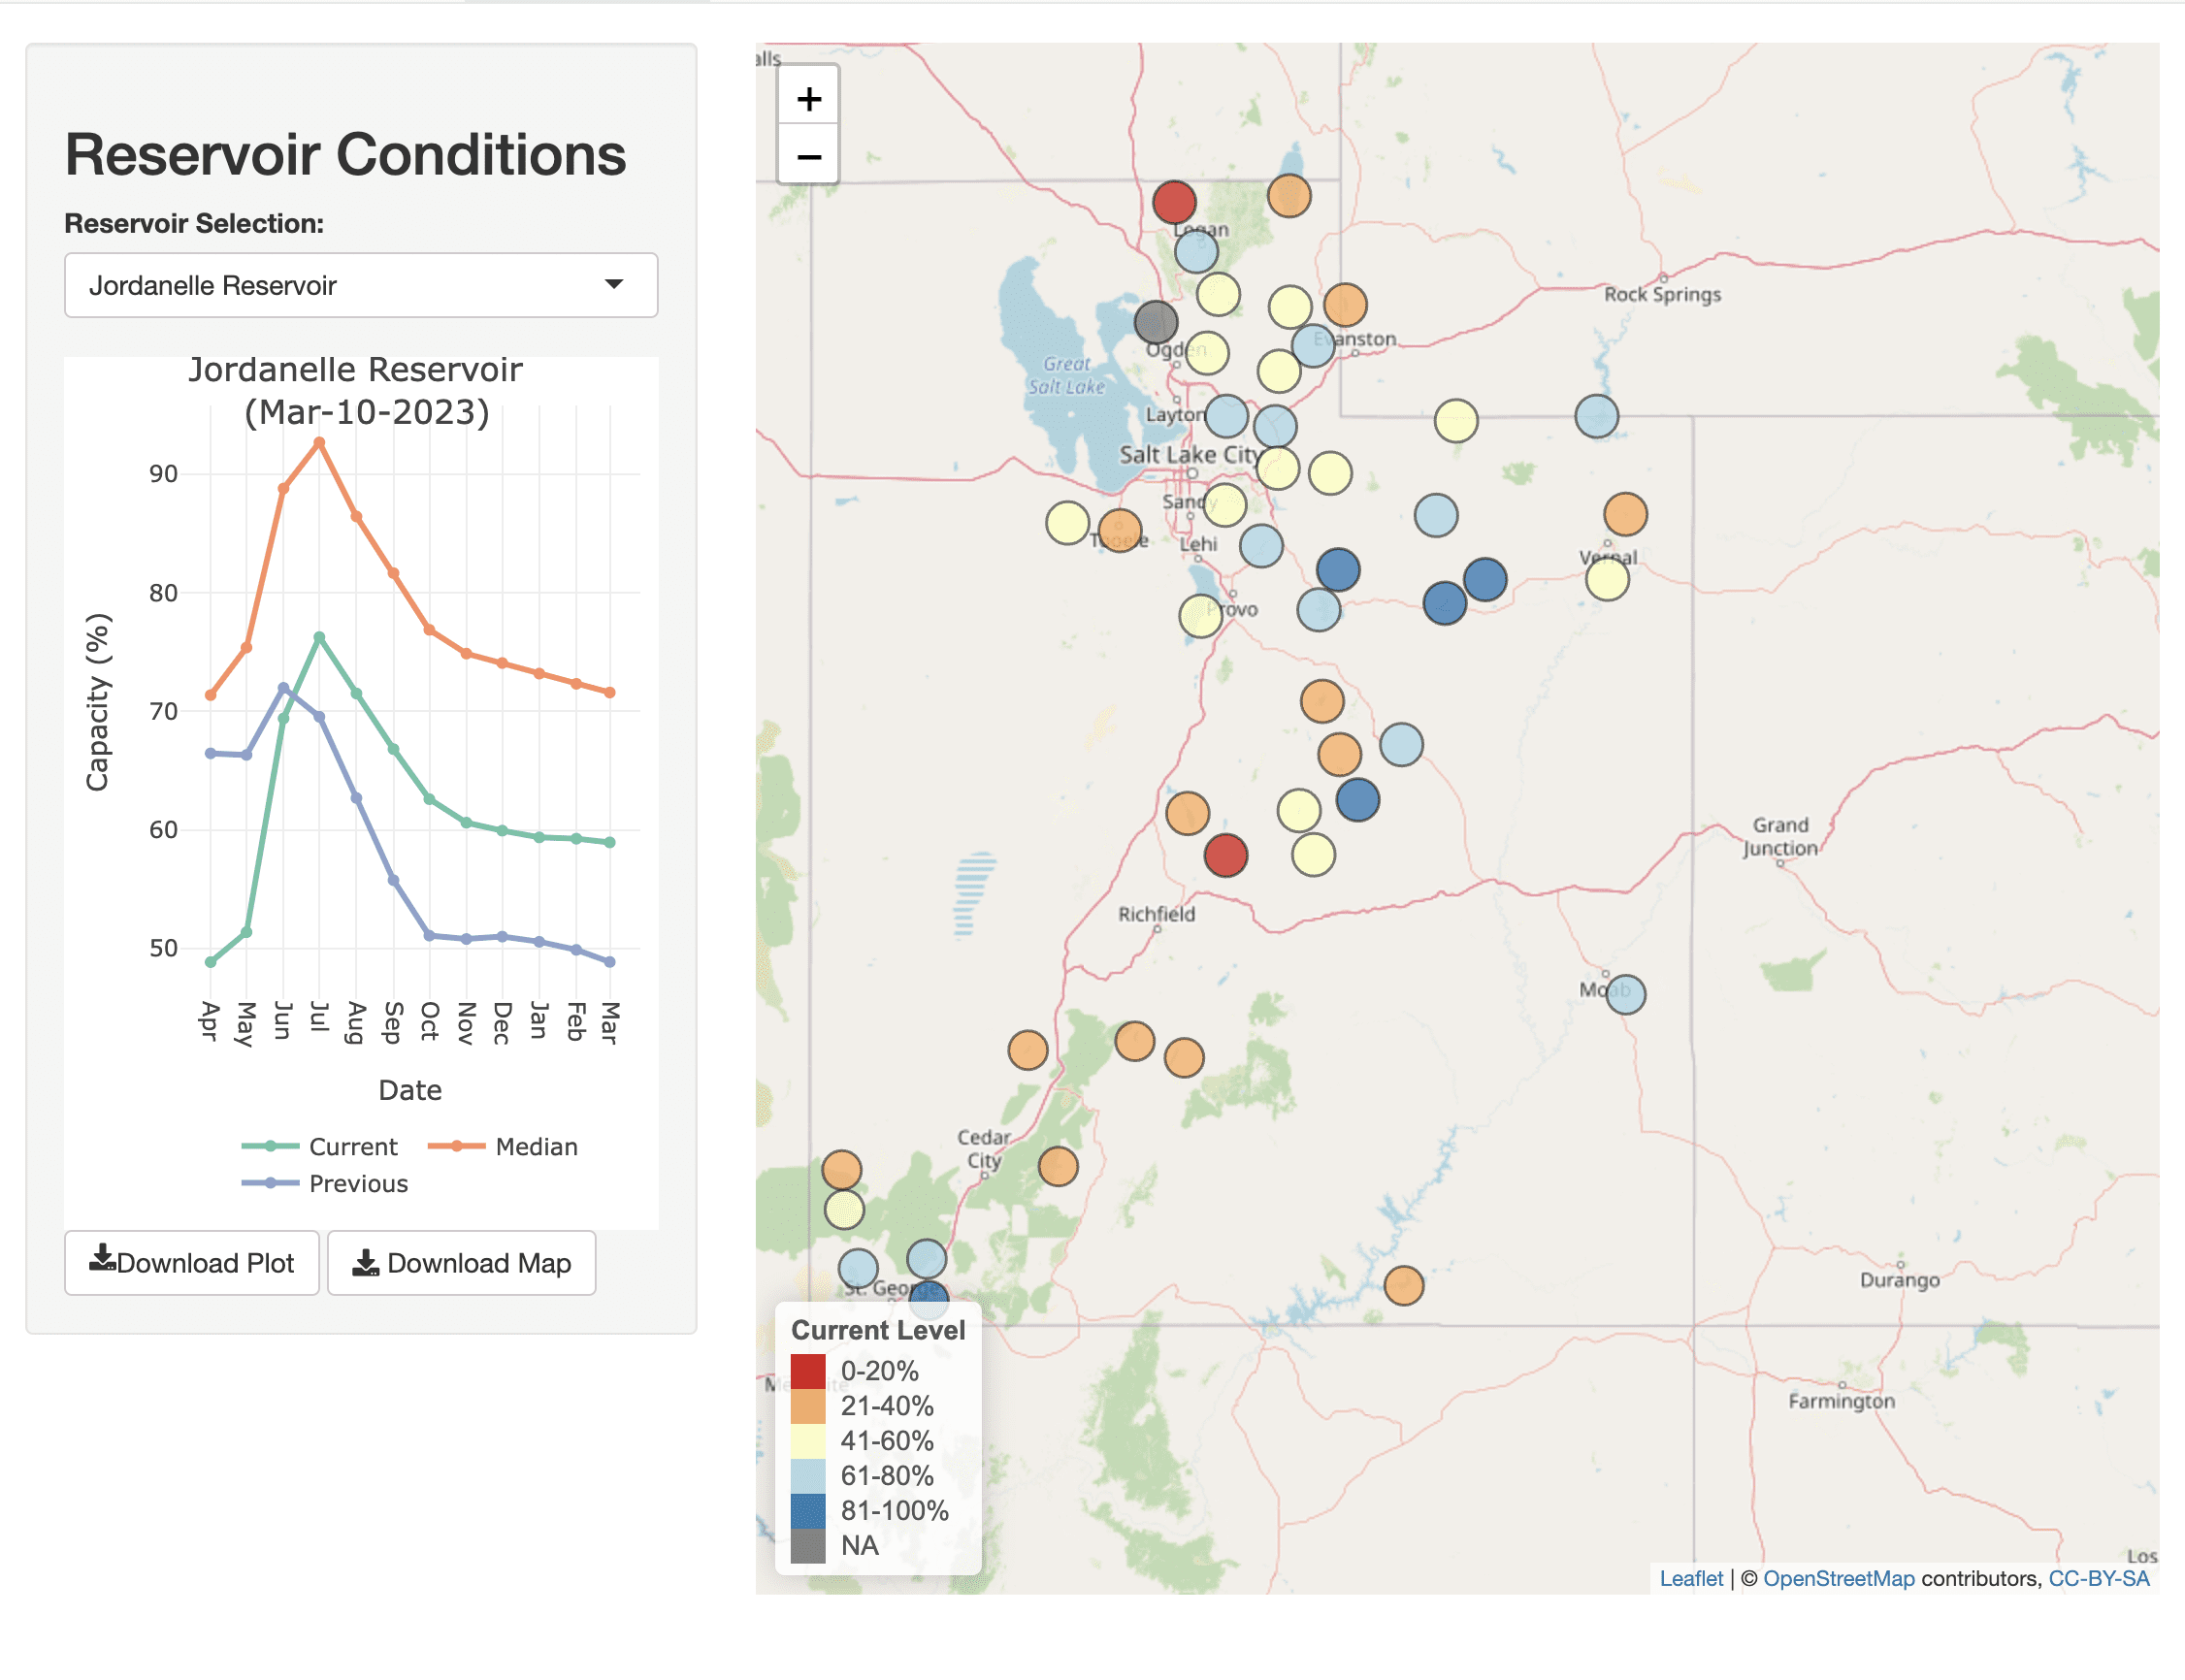 Reservoir conditions across Utah as of March 10, 2023.